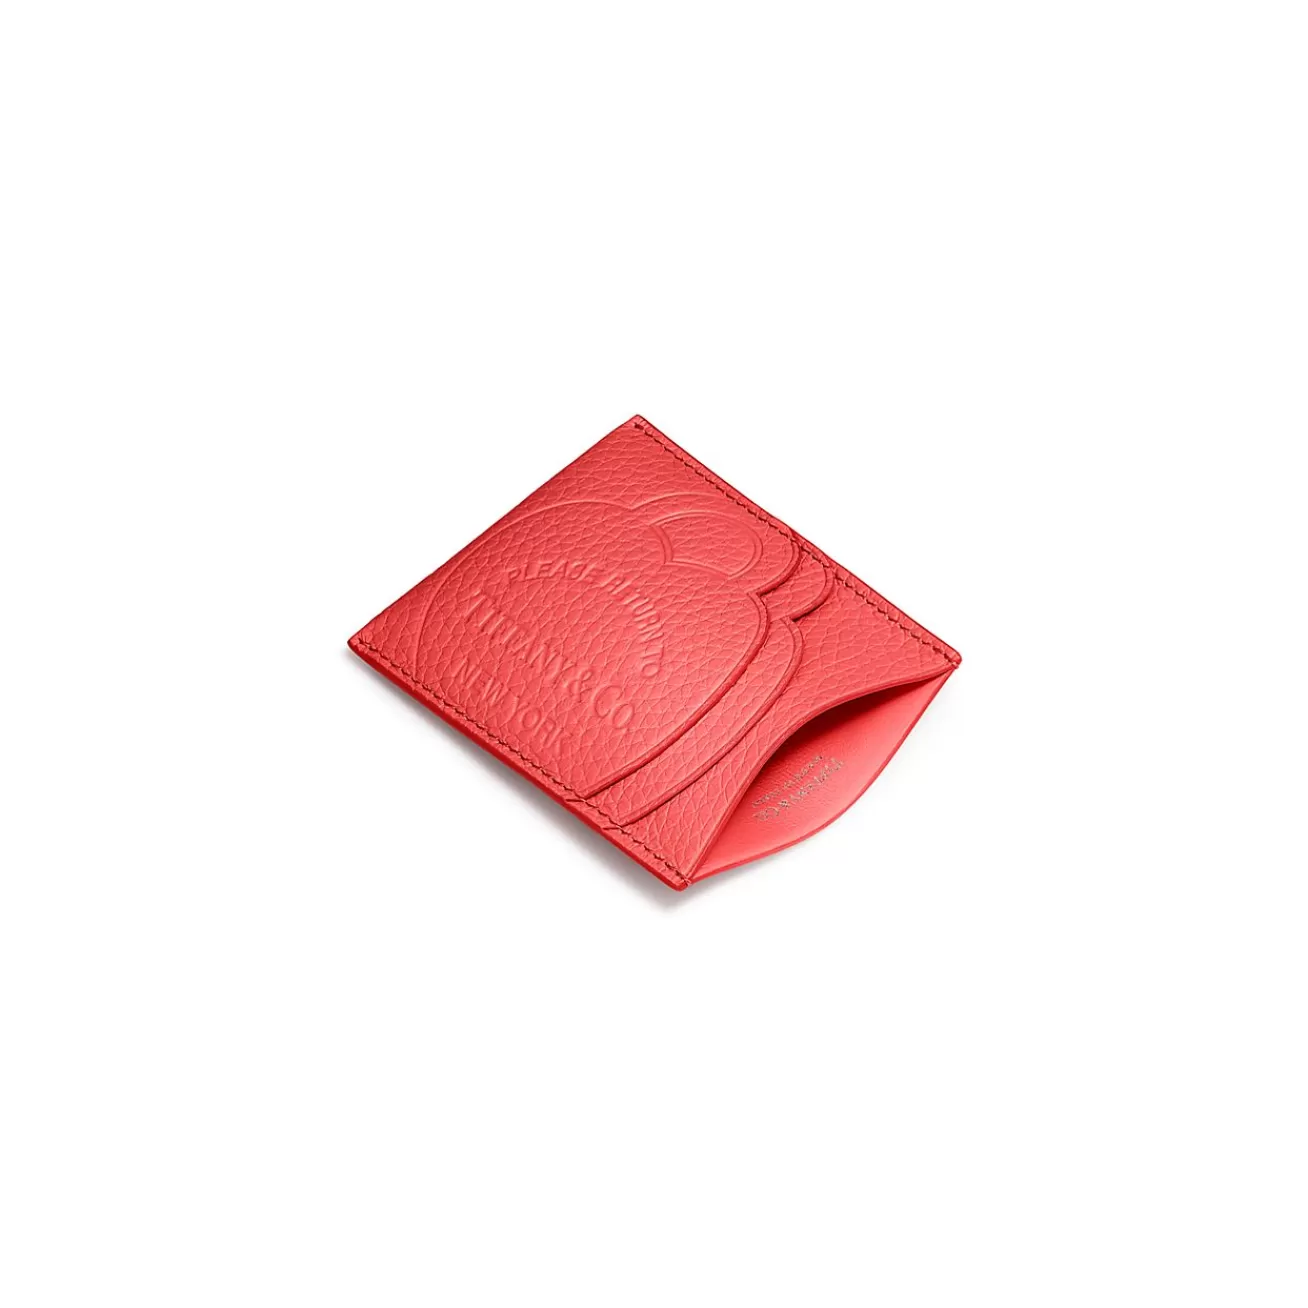 Tiffany & Co. Return to Tiffany® Card Case in Hibiscus Red Leather | ^Women Business Gifts | Small Leather Goods